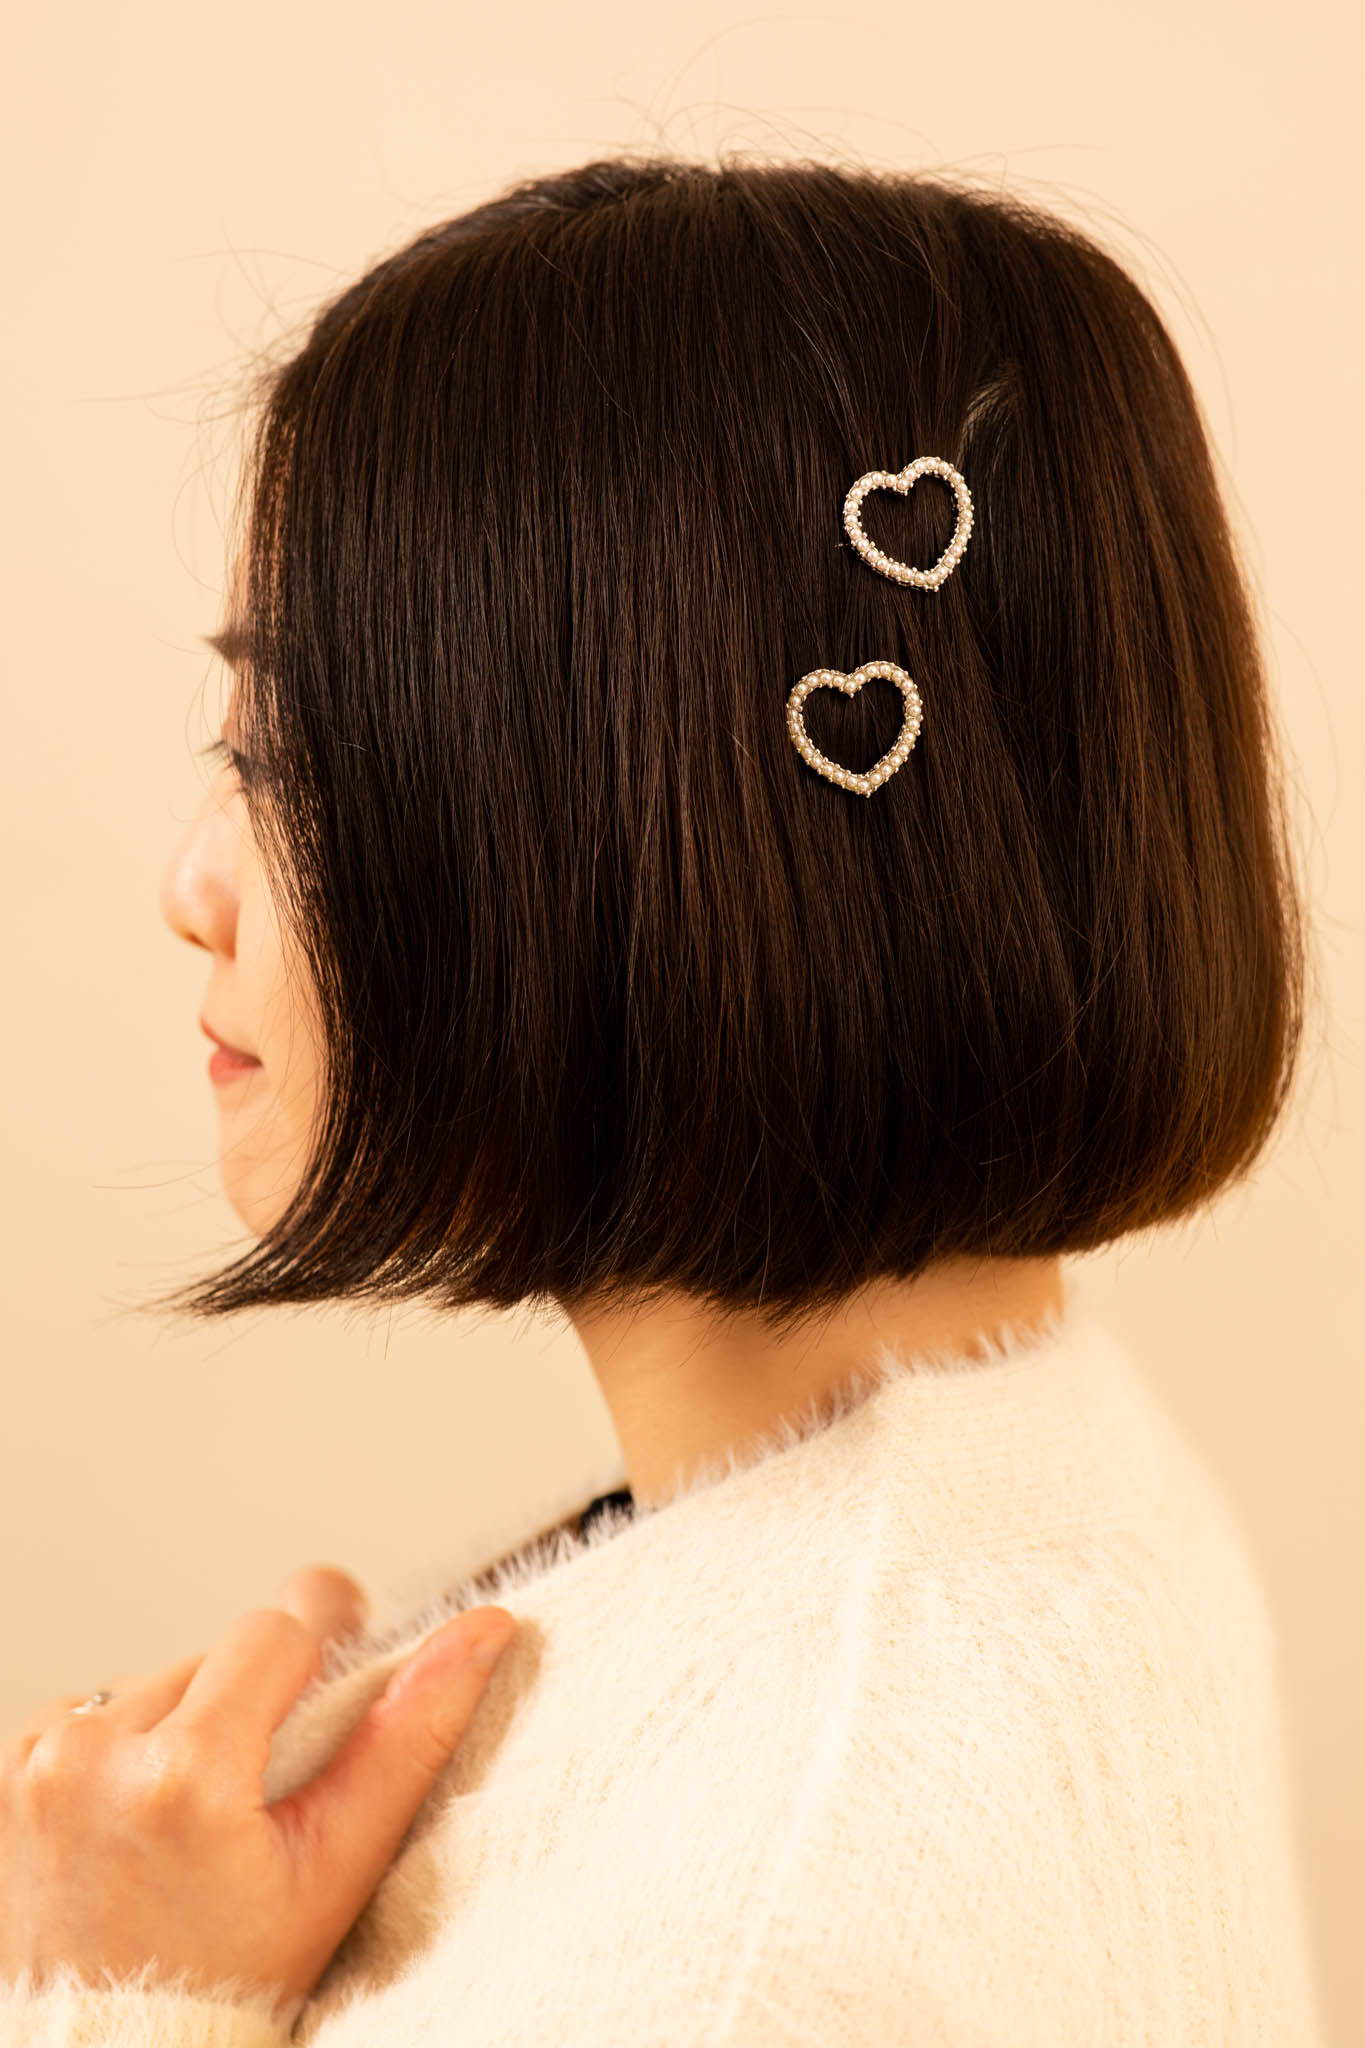 5 Best Hairstyles Using Hair Accessories For Short Hair